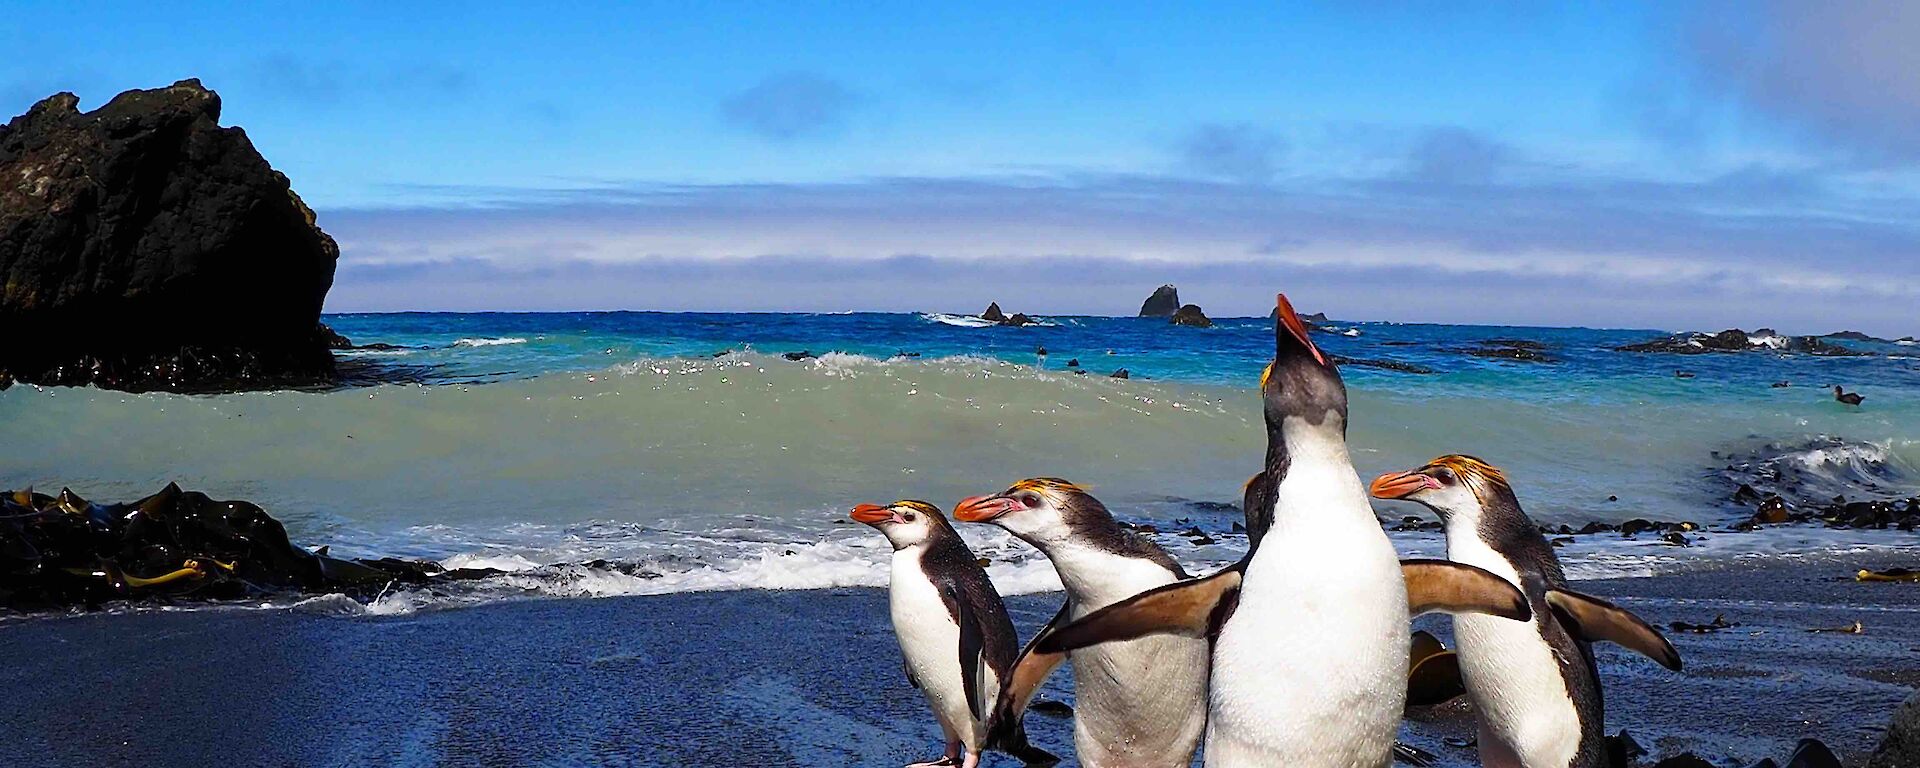 Royal penguins standing on the beach in the sunshine